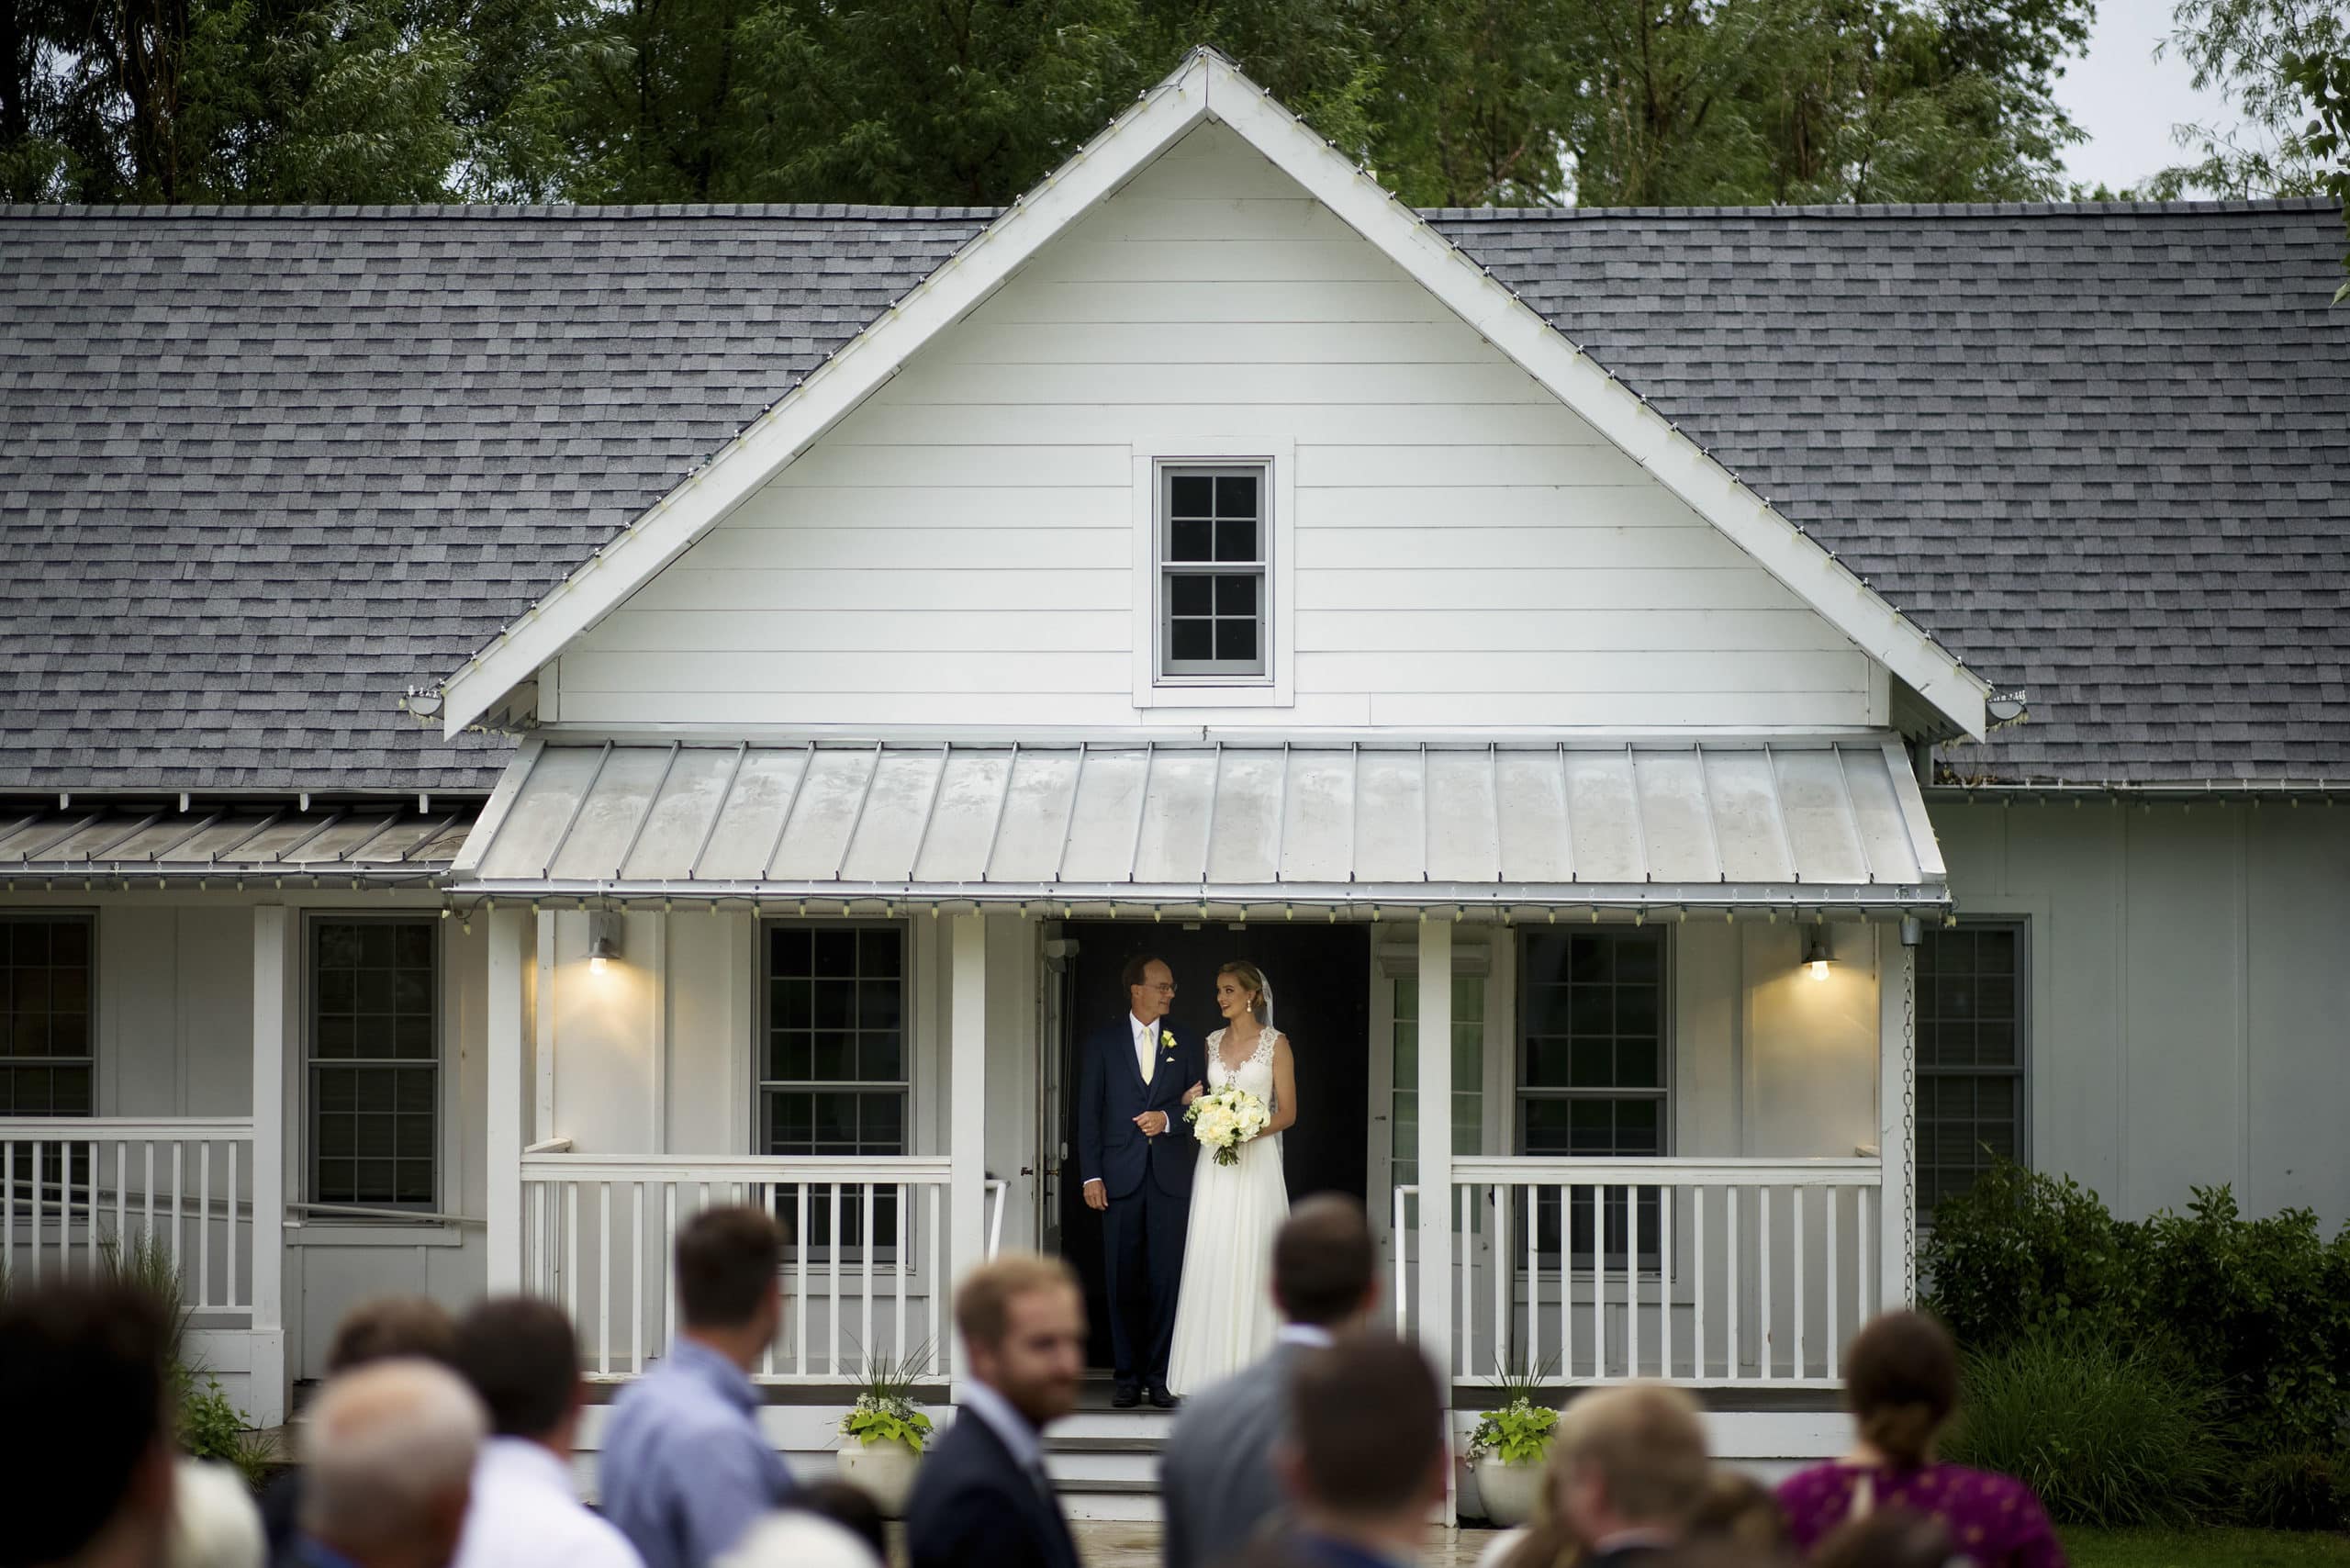 The bride and her father exit the bridal cottage during the wedding ceremony at the barn at raccoon creek